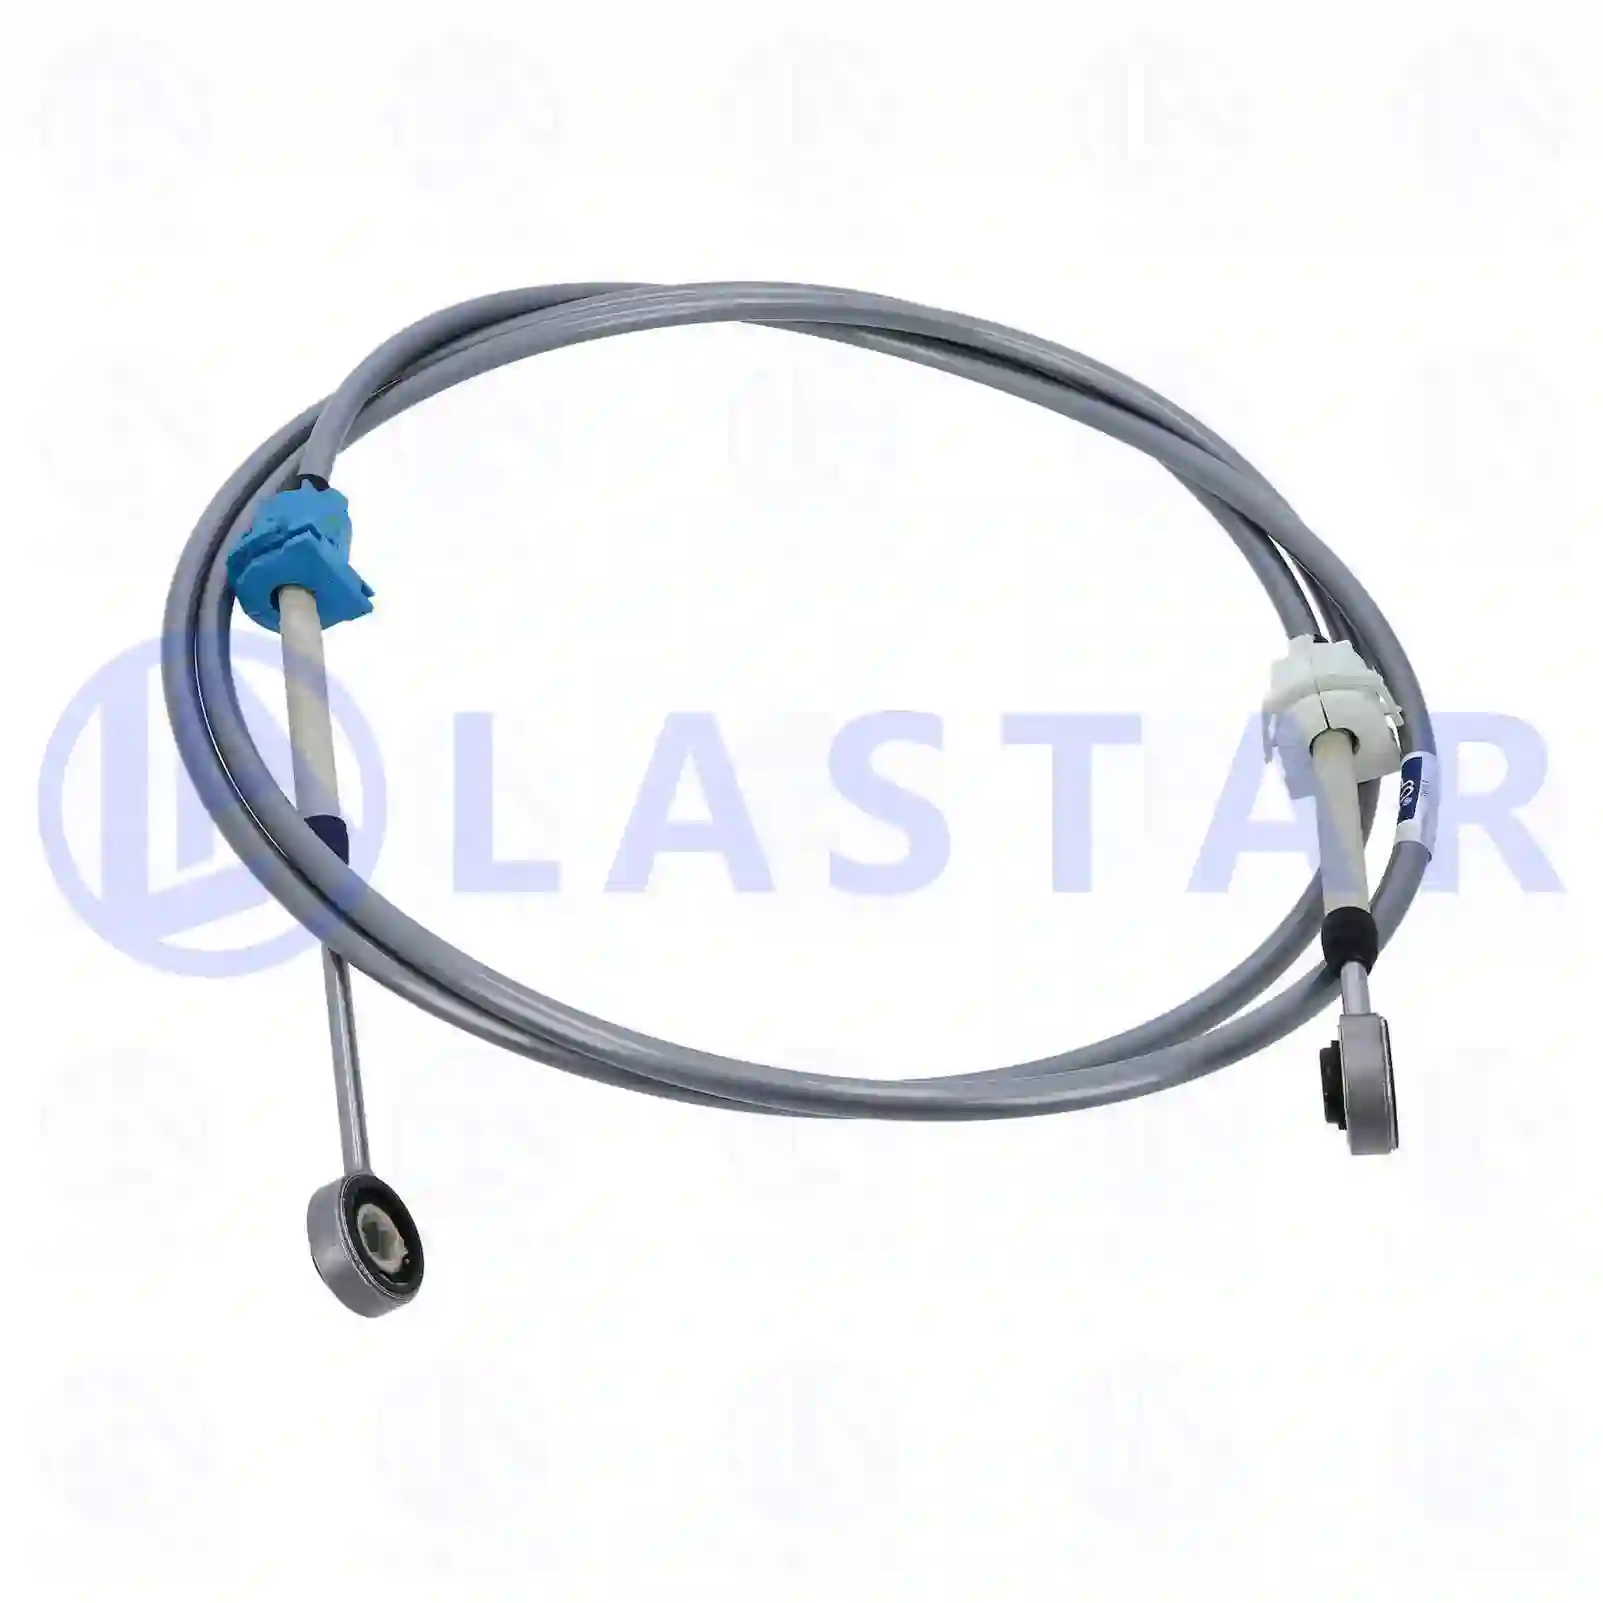 Control cable, switching, 77732415, 20545959, 20700959, 21002859, 21343559, 21789675 ||  77732415 Lastar Spare Part | Truck Spare Parts, Auotomotive Spare Parts Control cable, switching, 77732415, 20545959, 20700959, 21002859, 21343559, 21789675 ||  77732415 Lastar Spare Part | Truck Spare Parts, Auotomotive Spare Parts